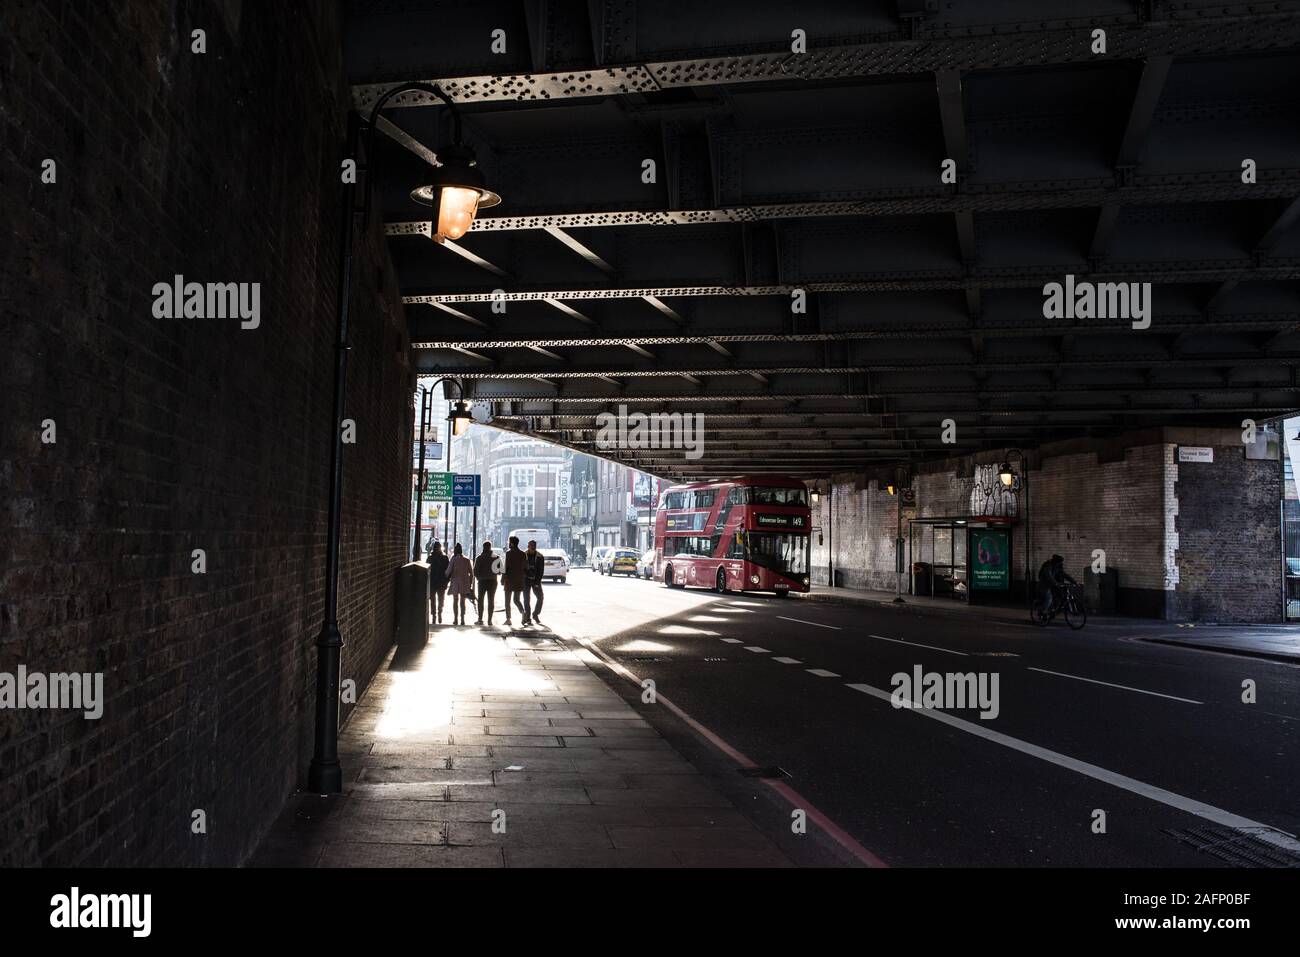 Street scene in Shoreditch, East London with shadows silhouettes of five people walking under a road bridge and red London bus Stock Photo